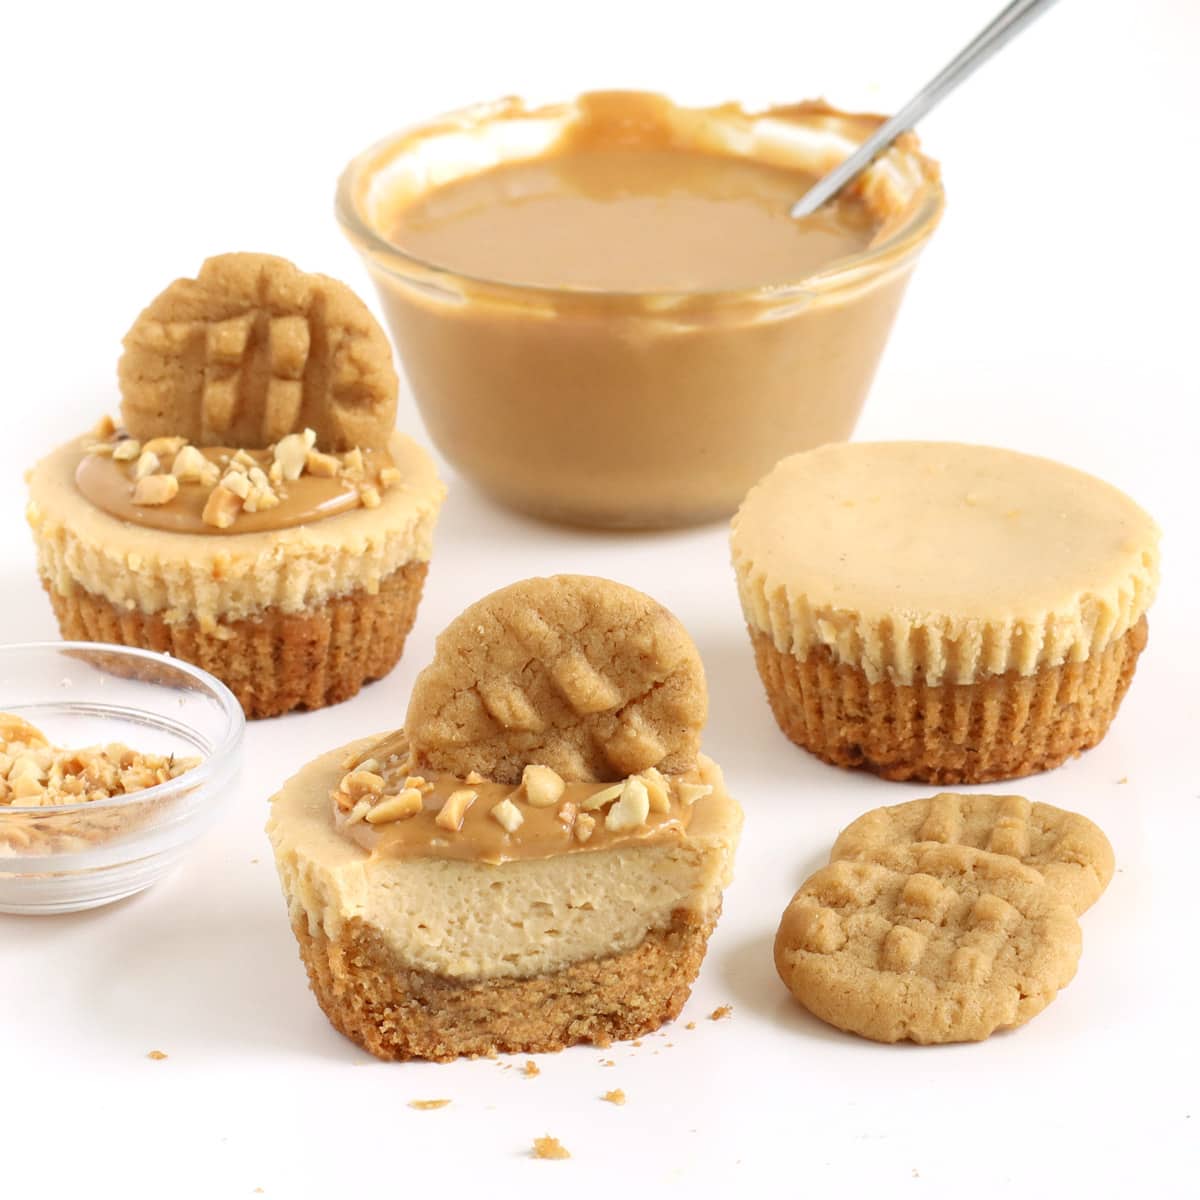 Peanut butter cheesecake cupcakes topped with creamy peanut butter, chopped peanuts, and mini peanut butter cookies.